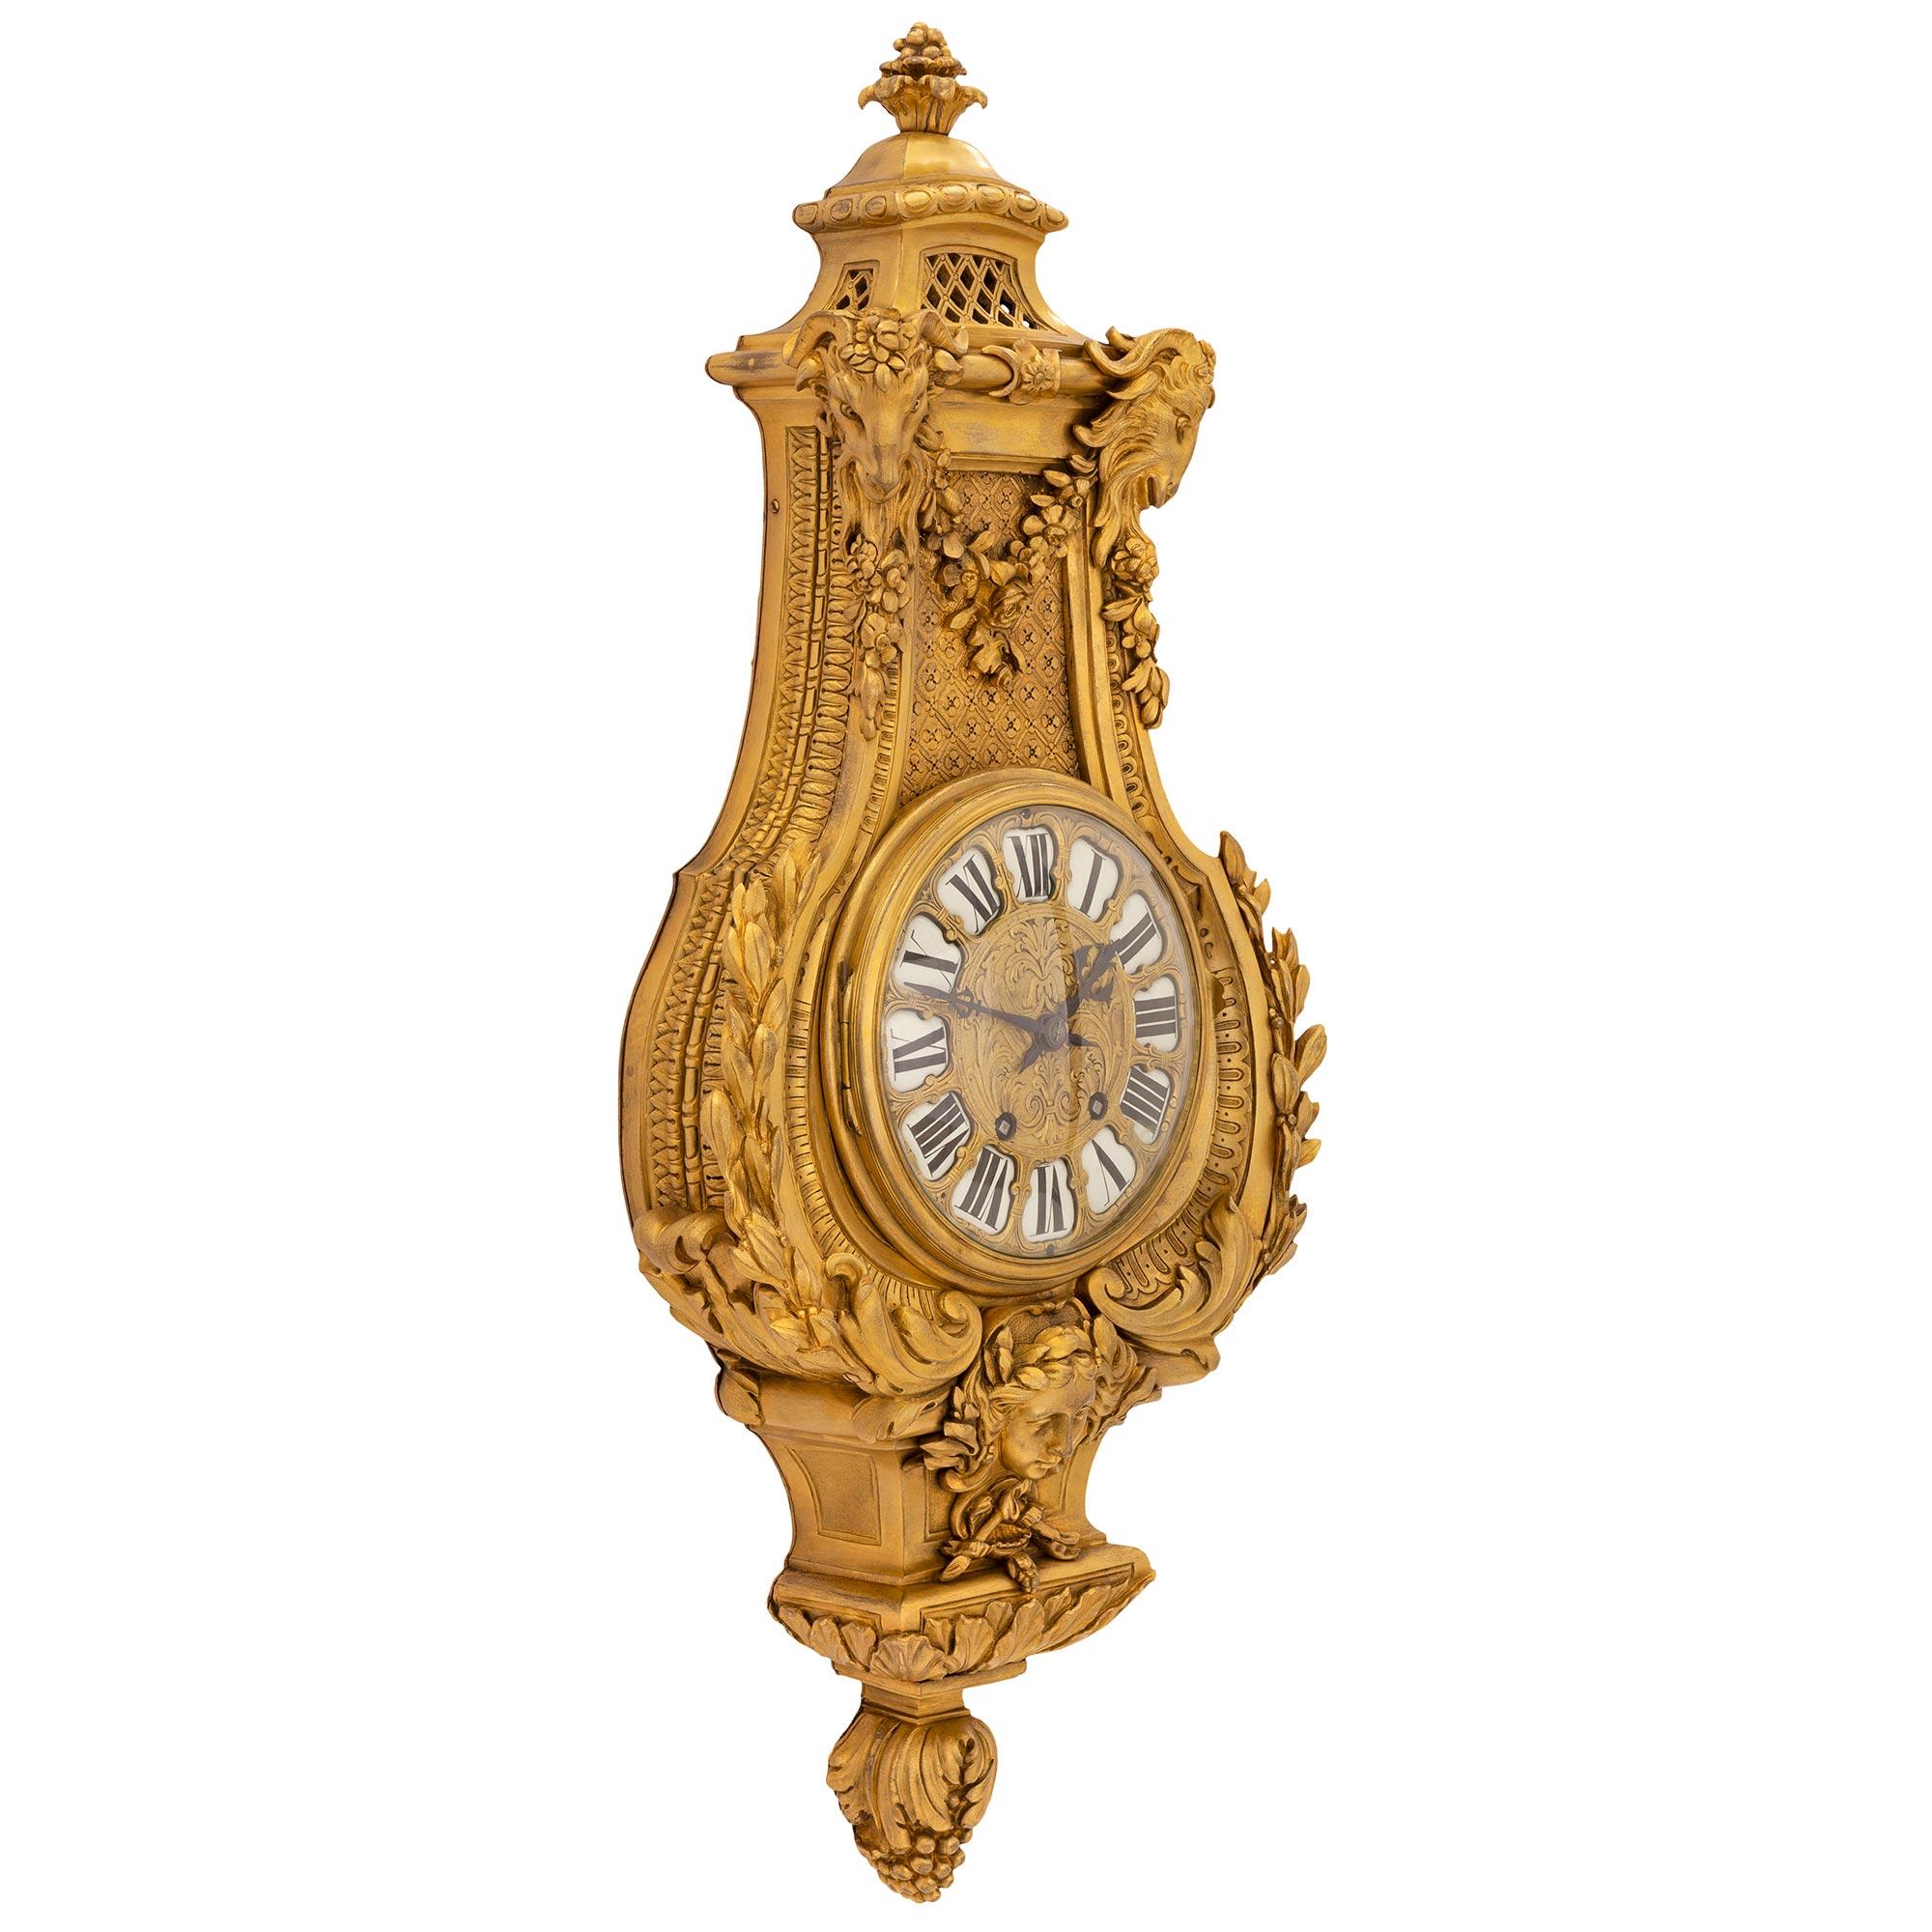 An exceptional and very high quality French mid 19th century Louis XVI st. ormolu cartel clock, by Etienne Maxant. The impressive wall clock is centered by a stunning richly chased bottom berried foliate finial below an intricately detailed mask of